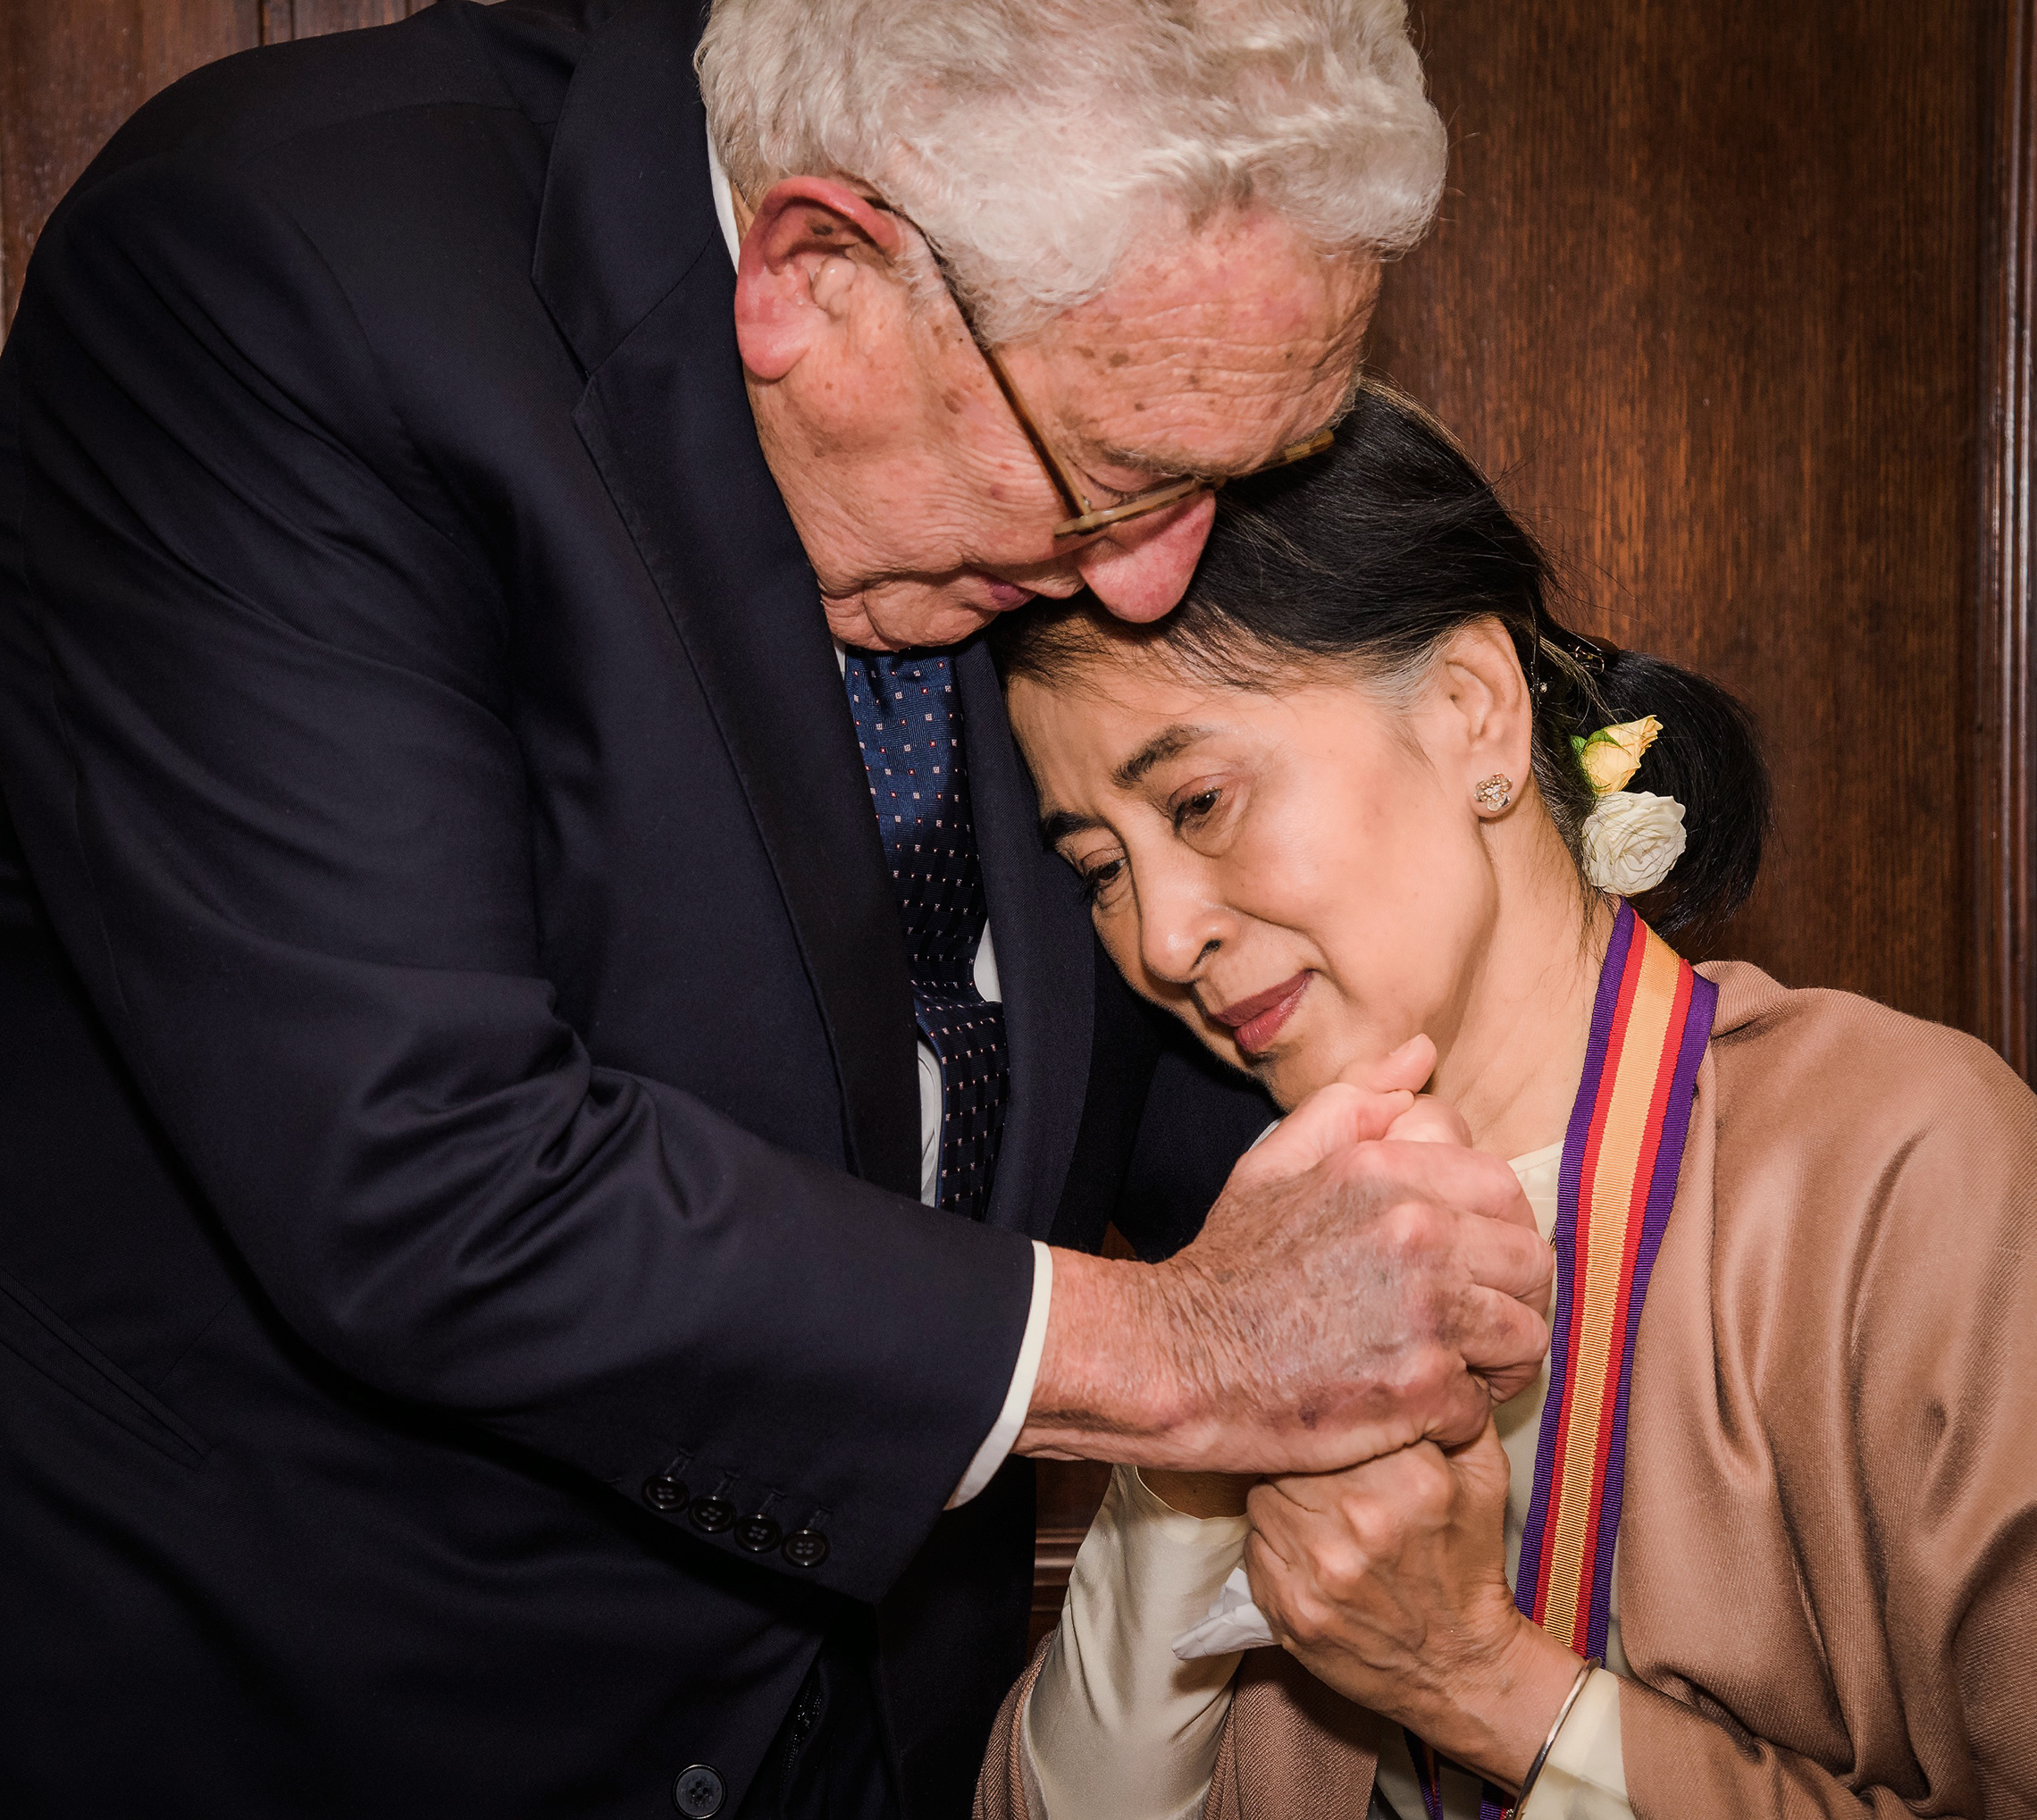 2016: Former U.S. Secretary of State and Nobel Peace Prize laureate Henry Kissinger and Aung San Suu Kyi, State Counsellor of Myanmar, at the New York Public Library.